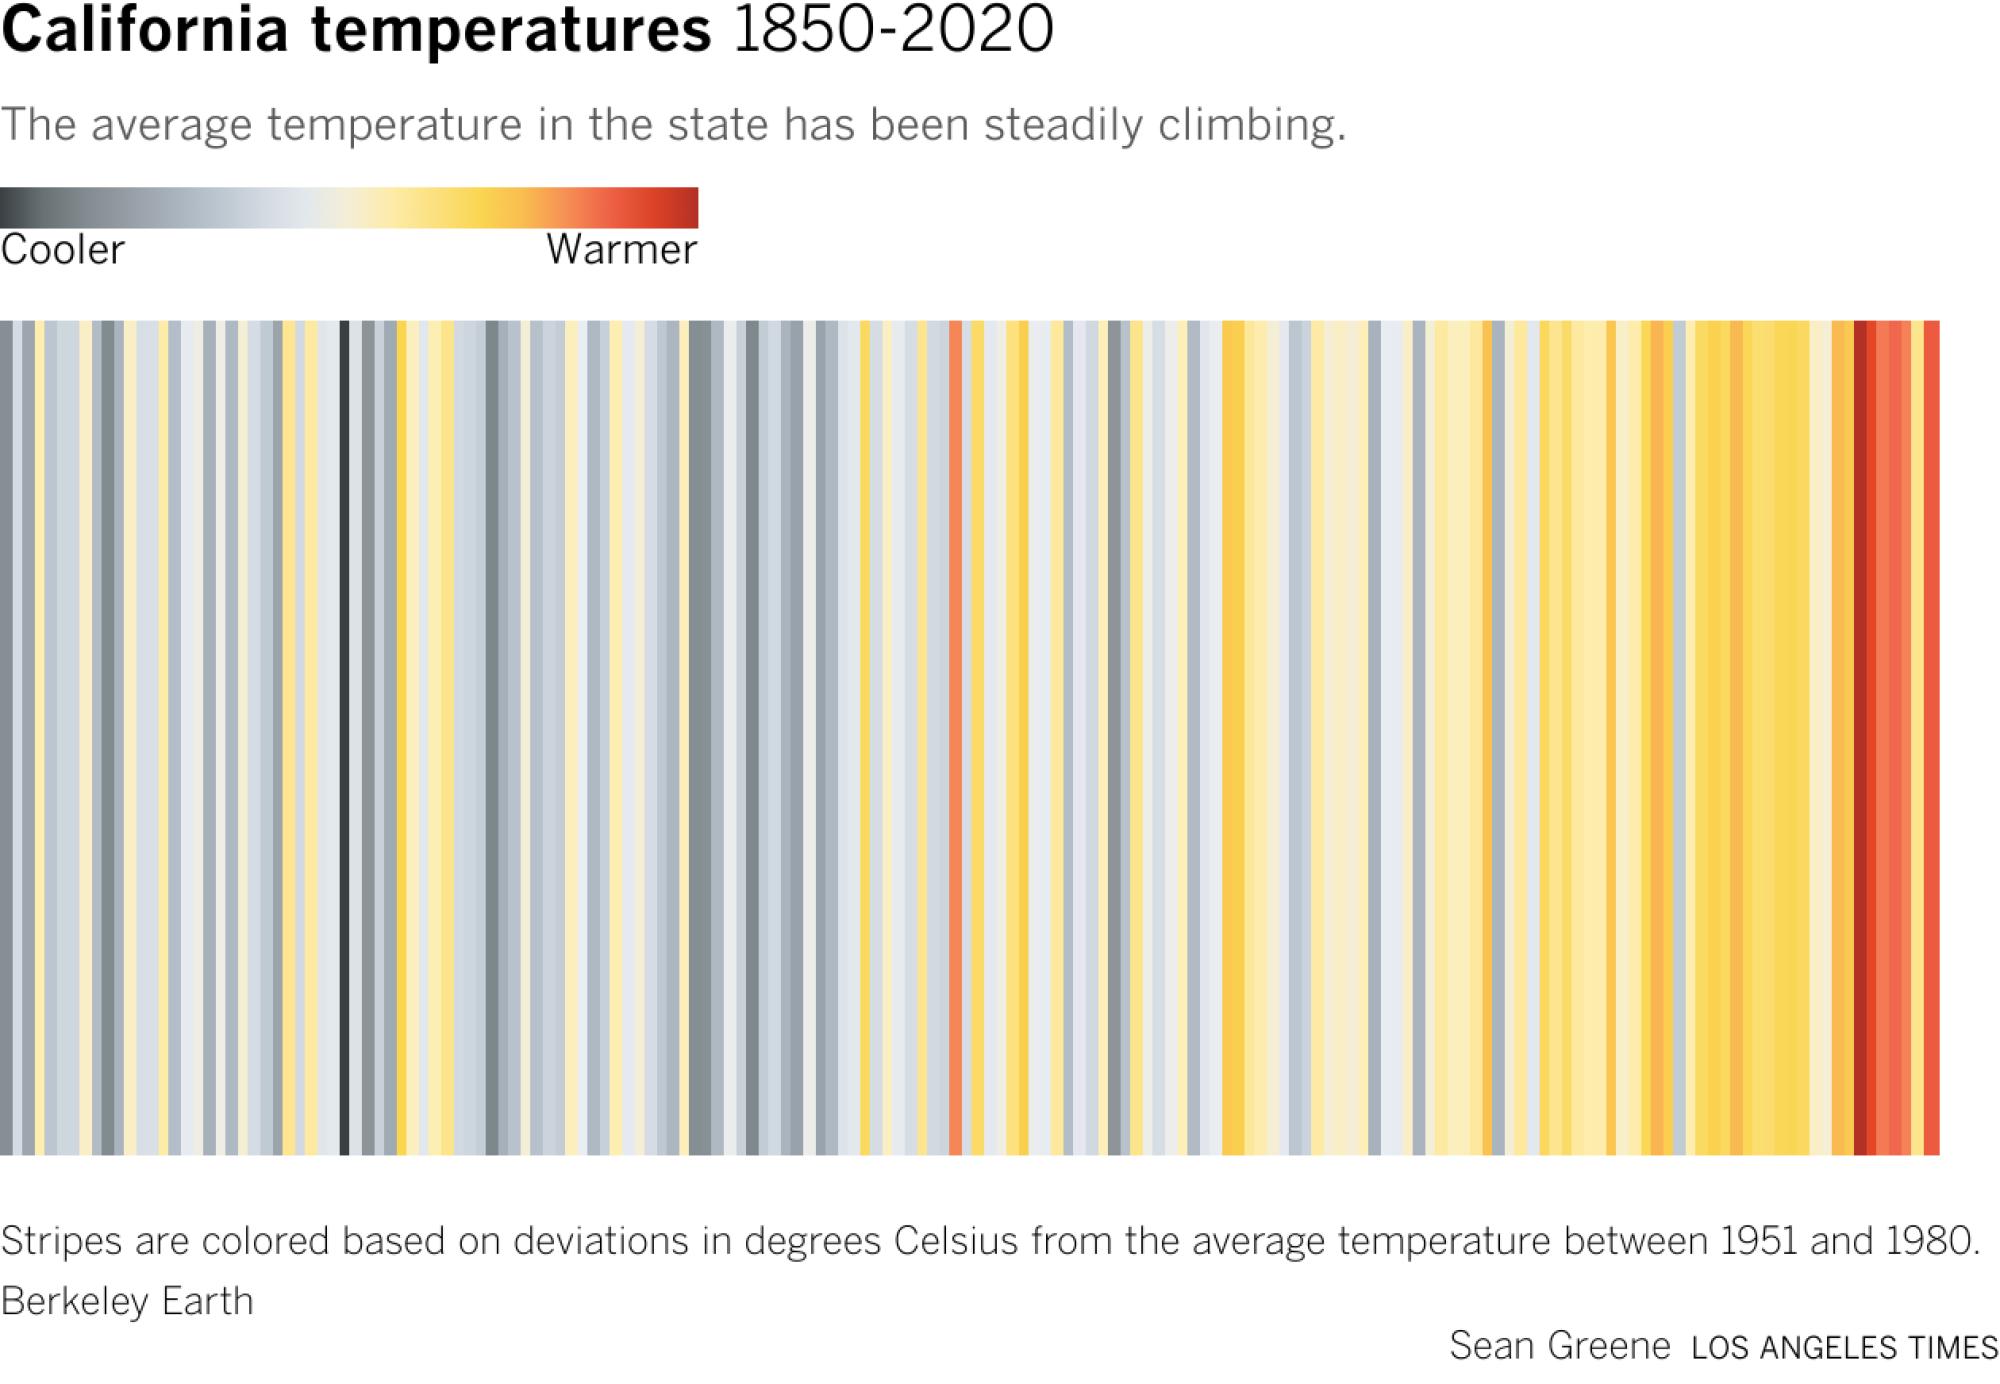 A climate stripes visualization showing a dramatic increase in temperature in the last 10 years.